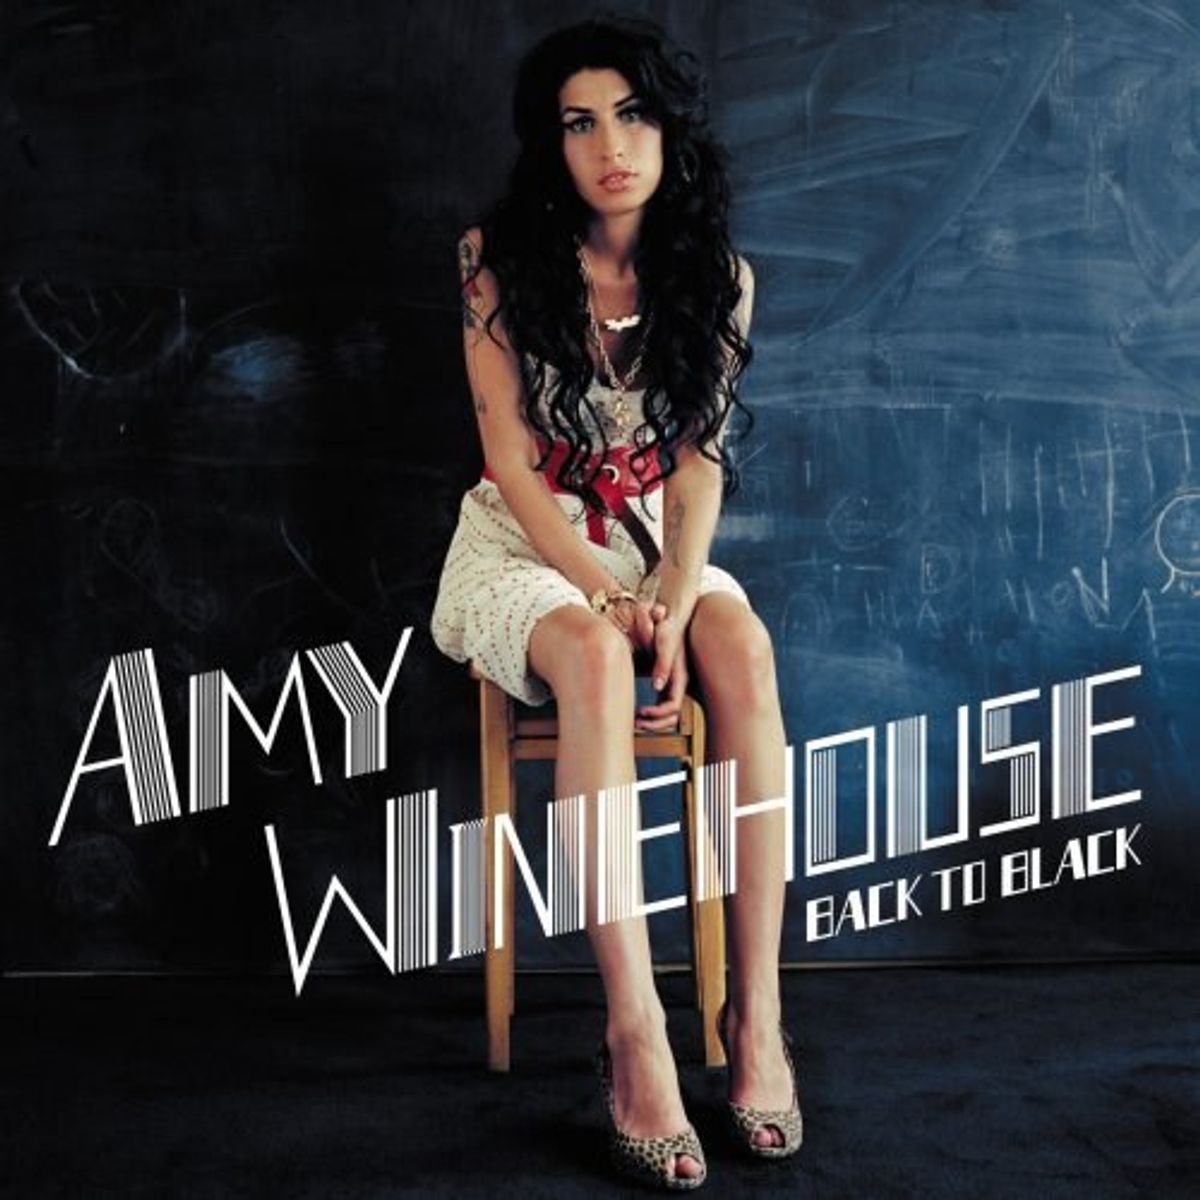 “Amy Winehouse’s Back To Black: Track By Track”